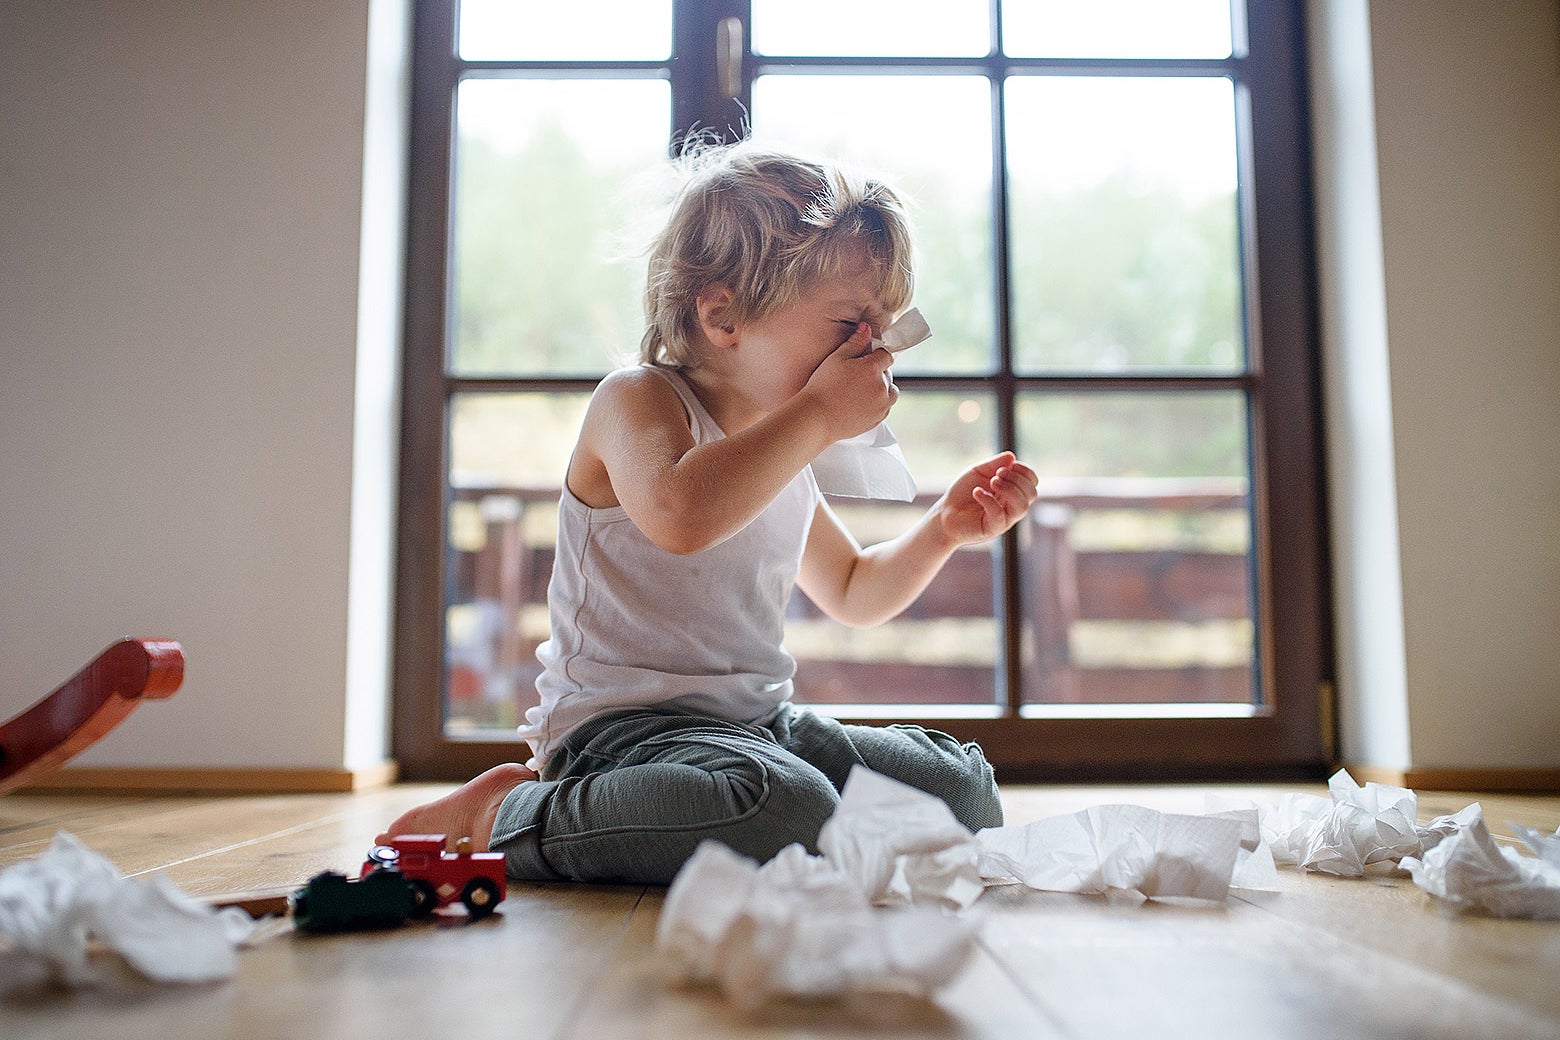 A young blond-haired boy surrounded by tissues sneezing into one.